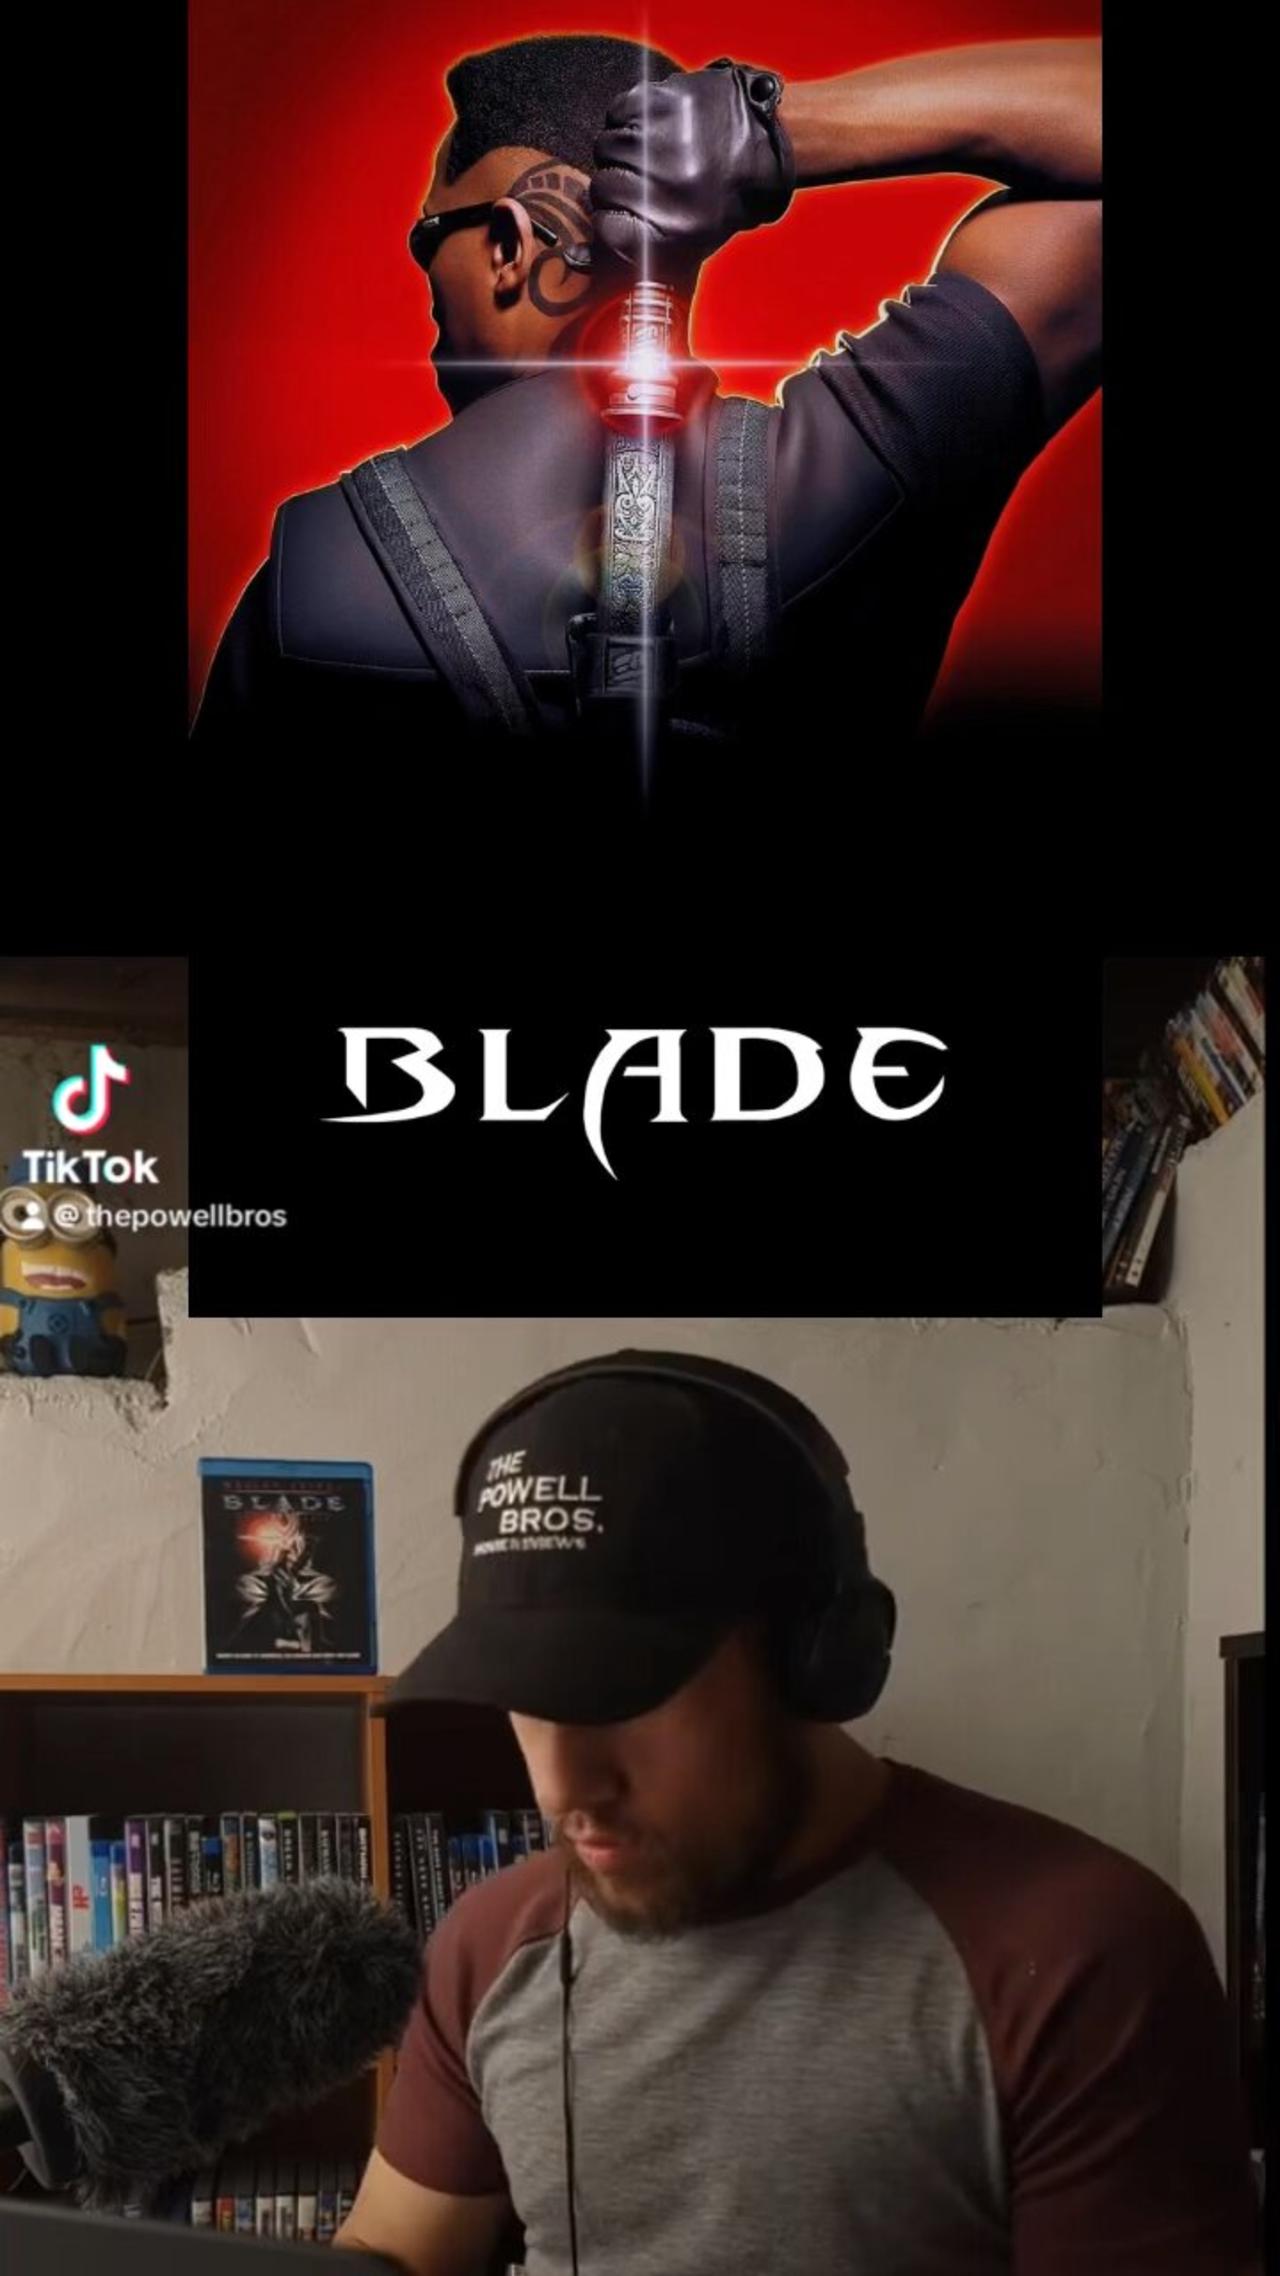 Clip from our Blade review